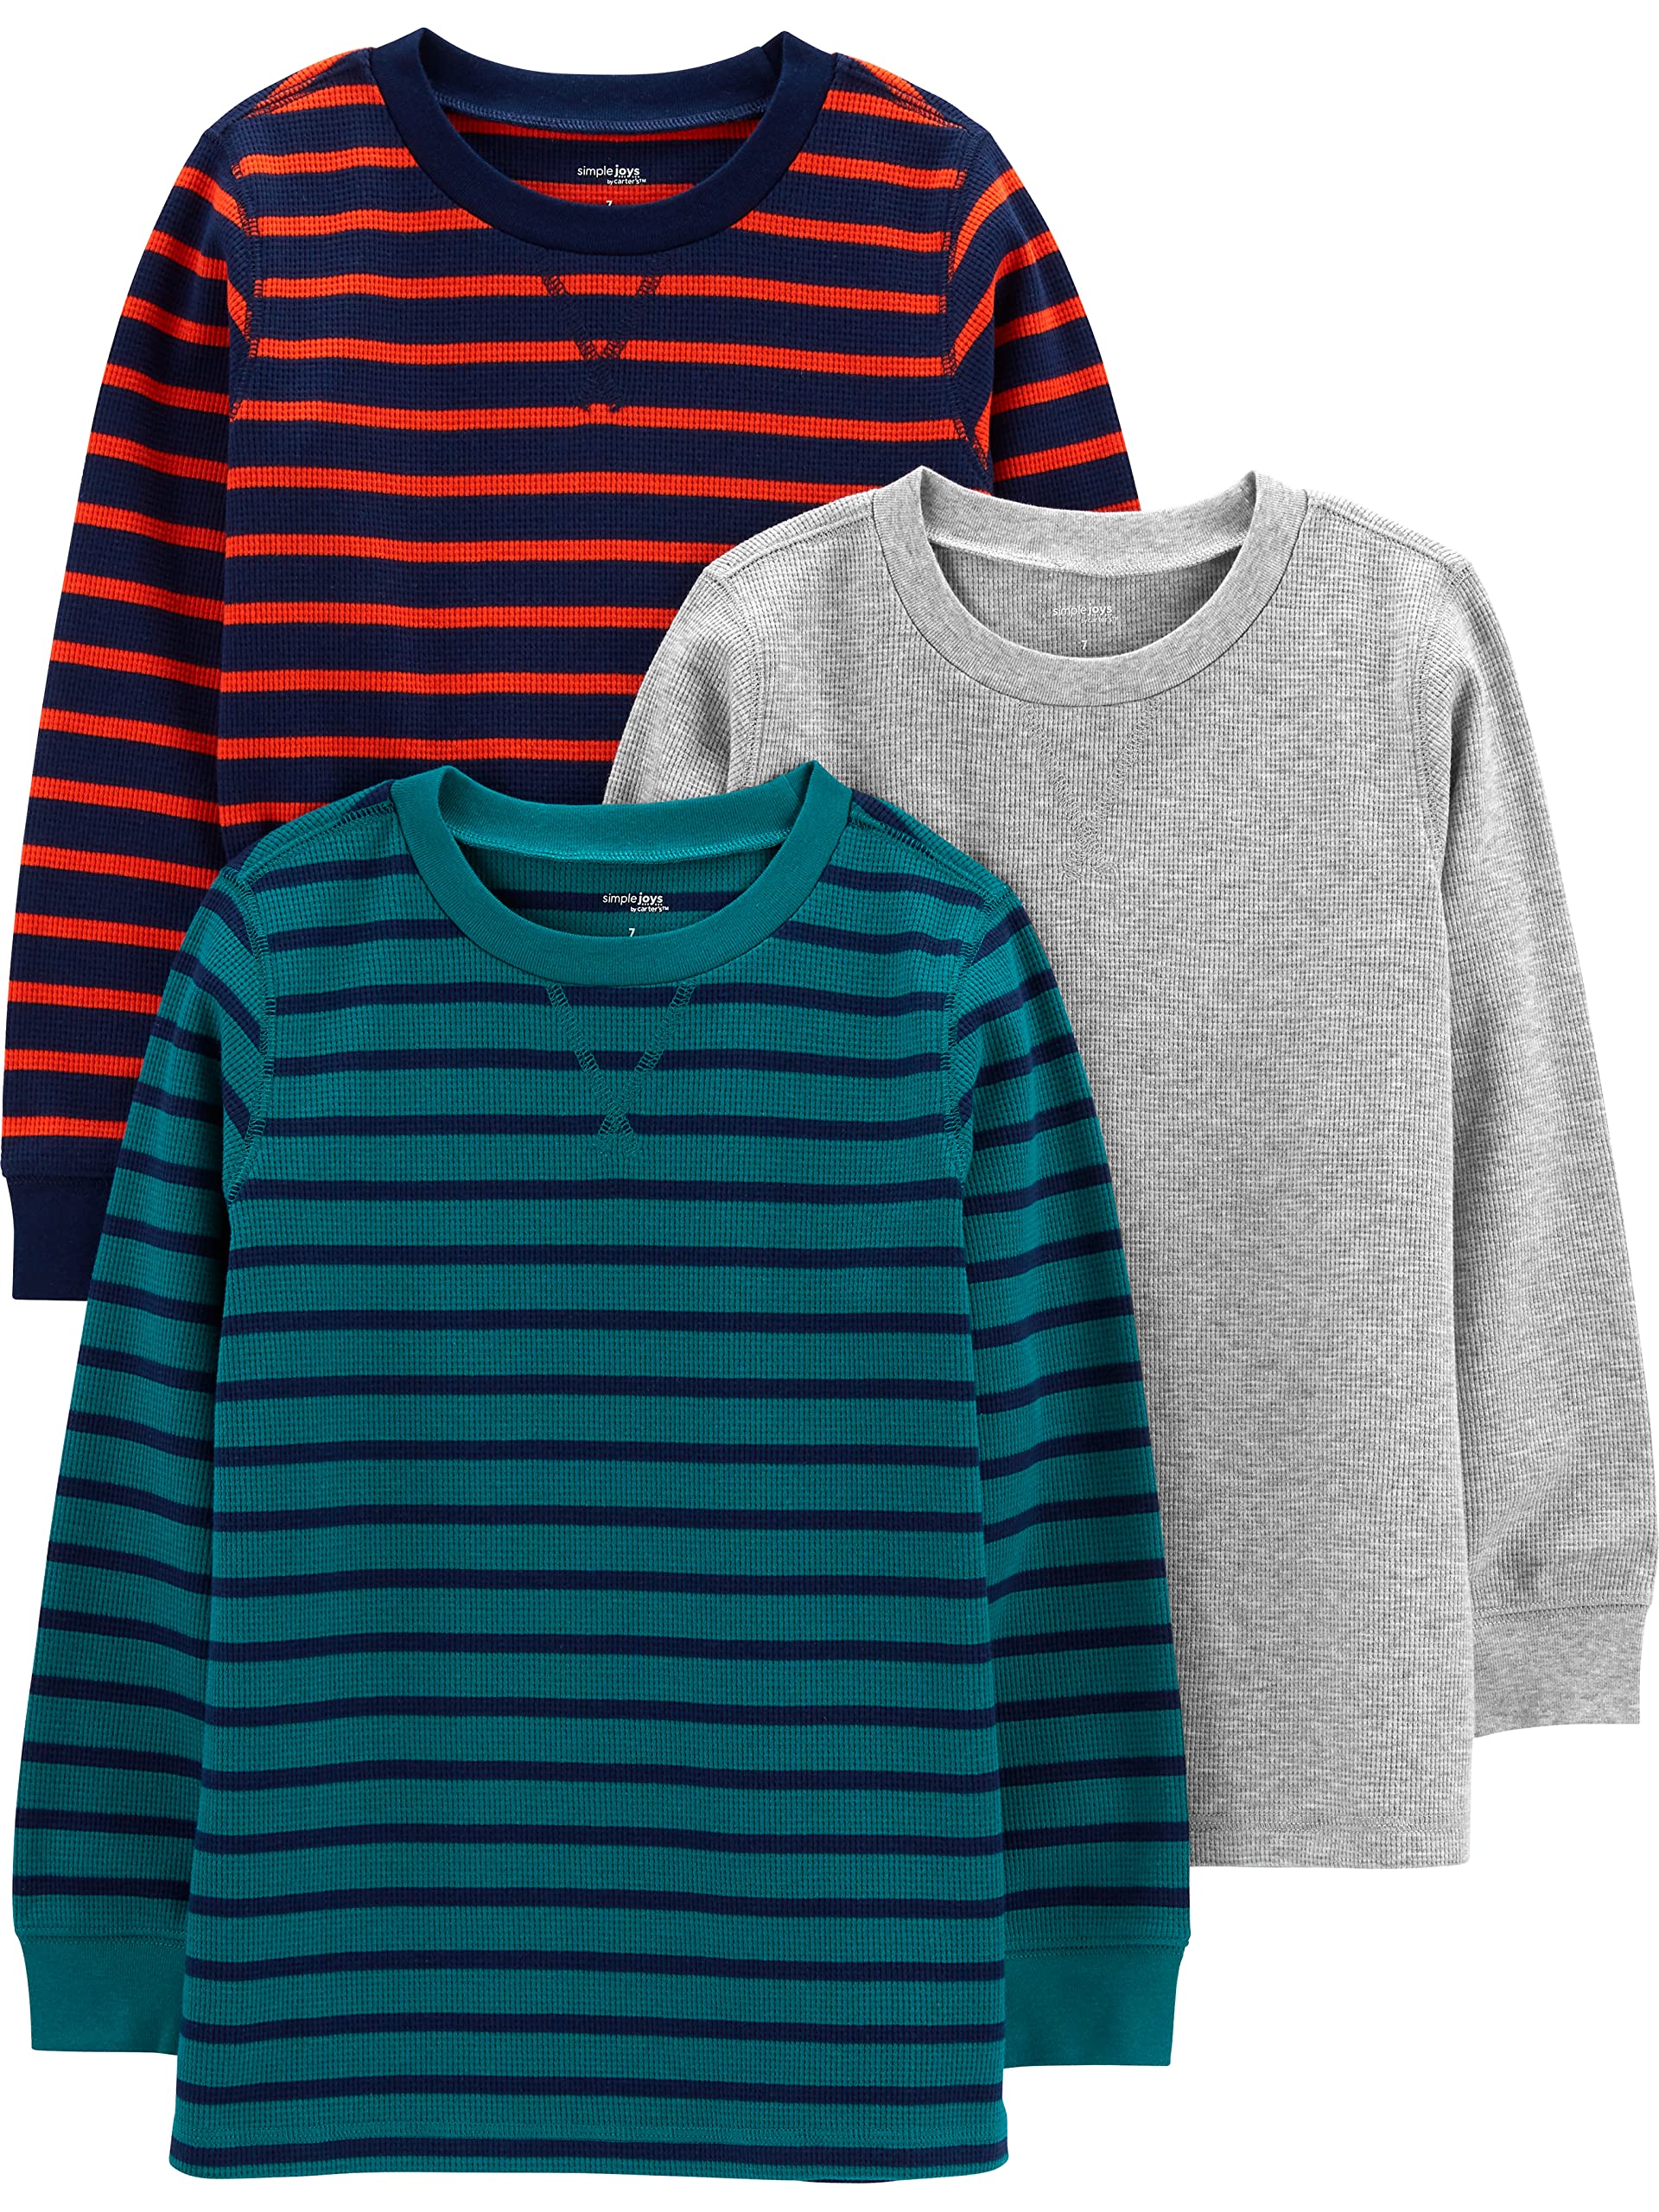 Simple Joys by Carter's Boys' 3-Pack Thermal Long Sleeve Shirts